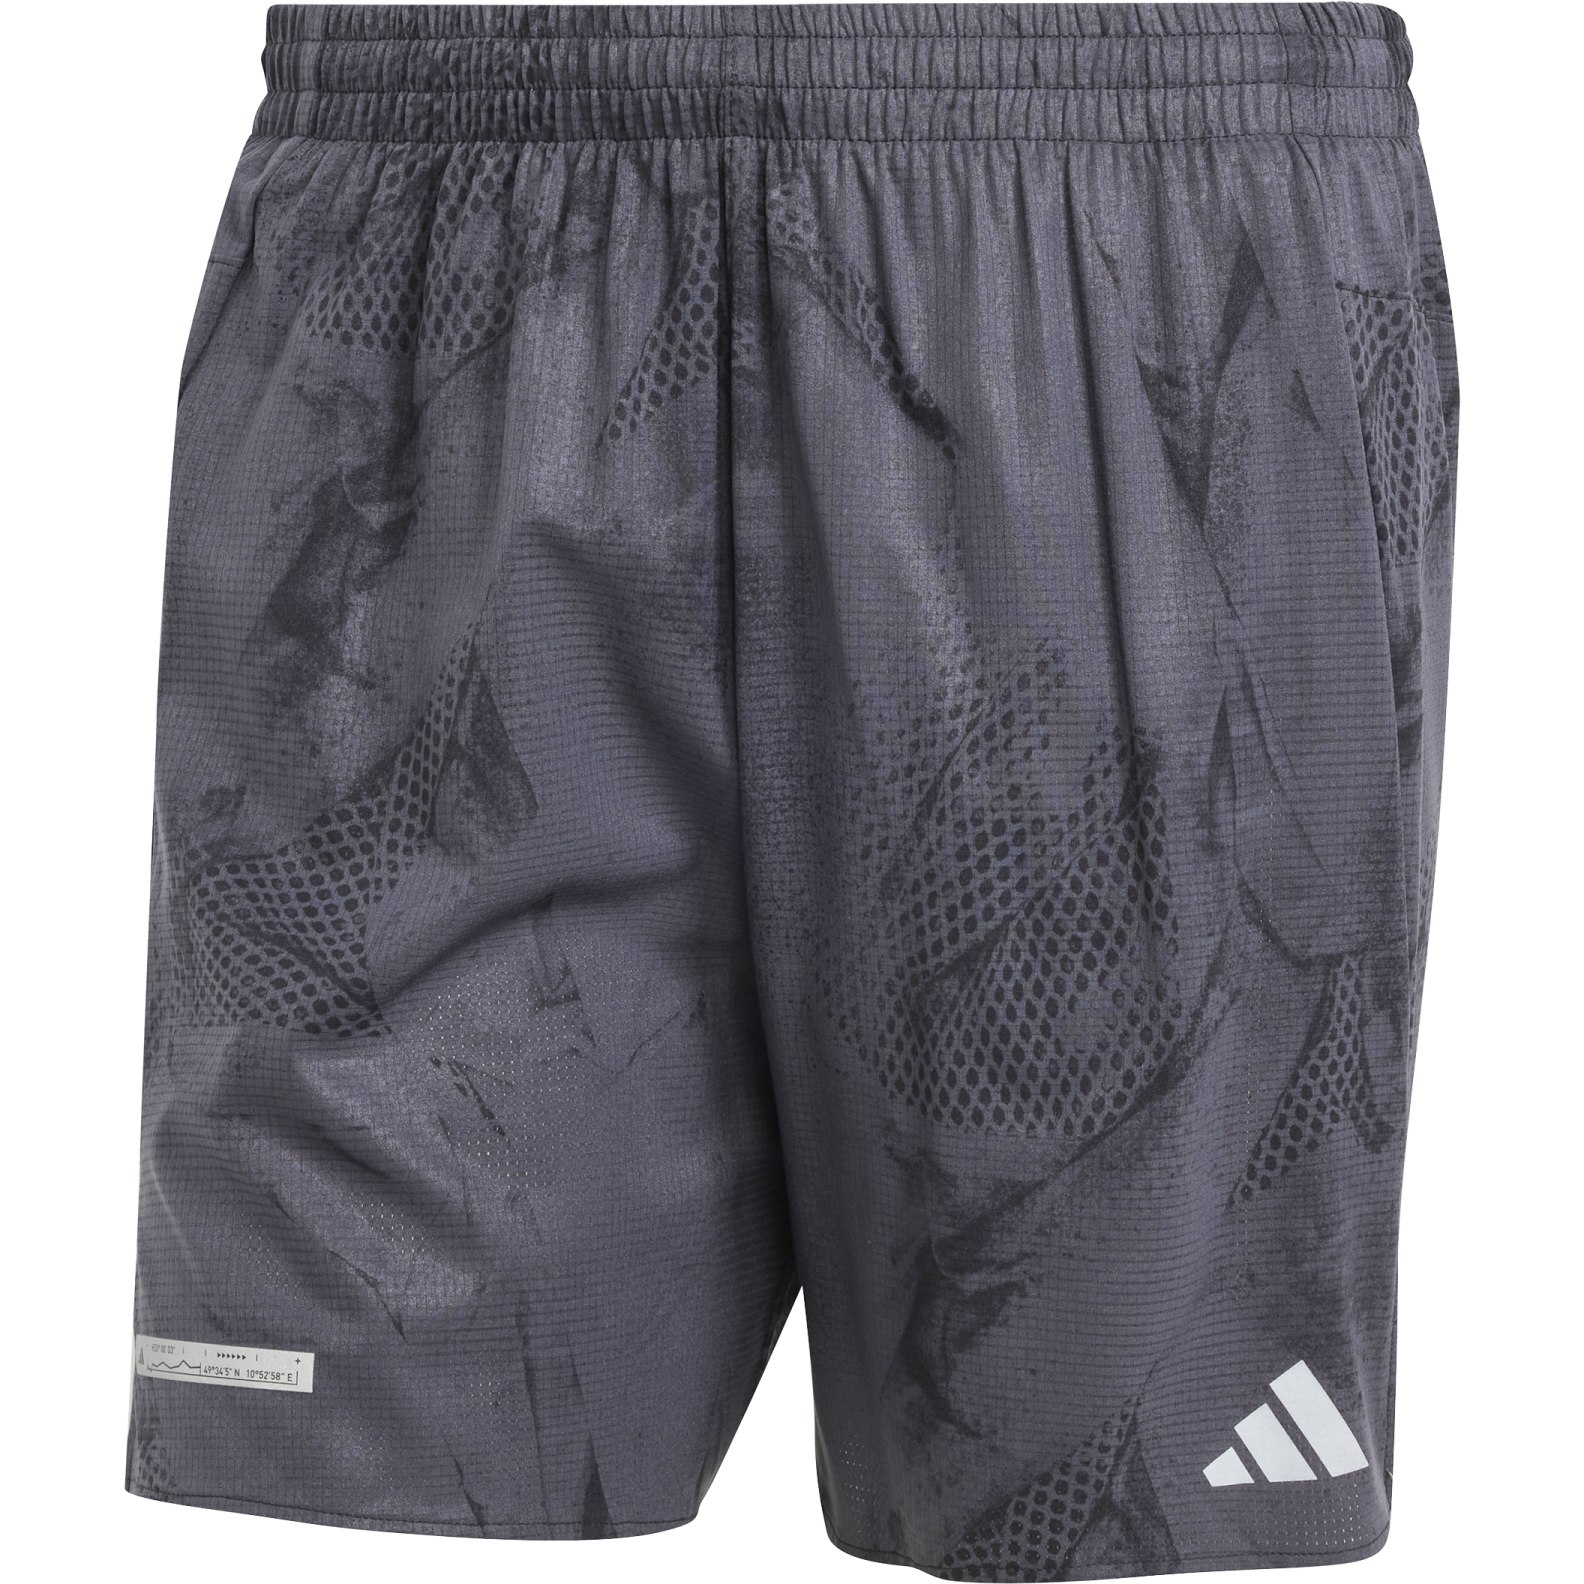 Image of adidas Ultimate Allover Print Running Shorts Men - carbon/black IL7183